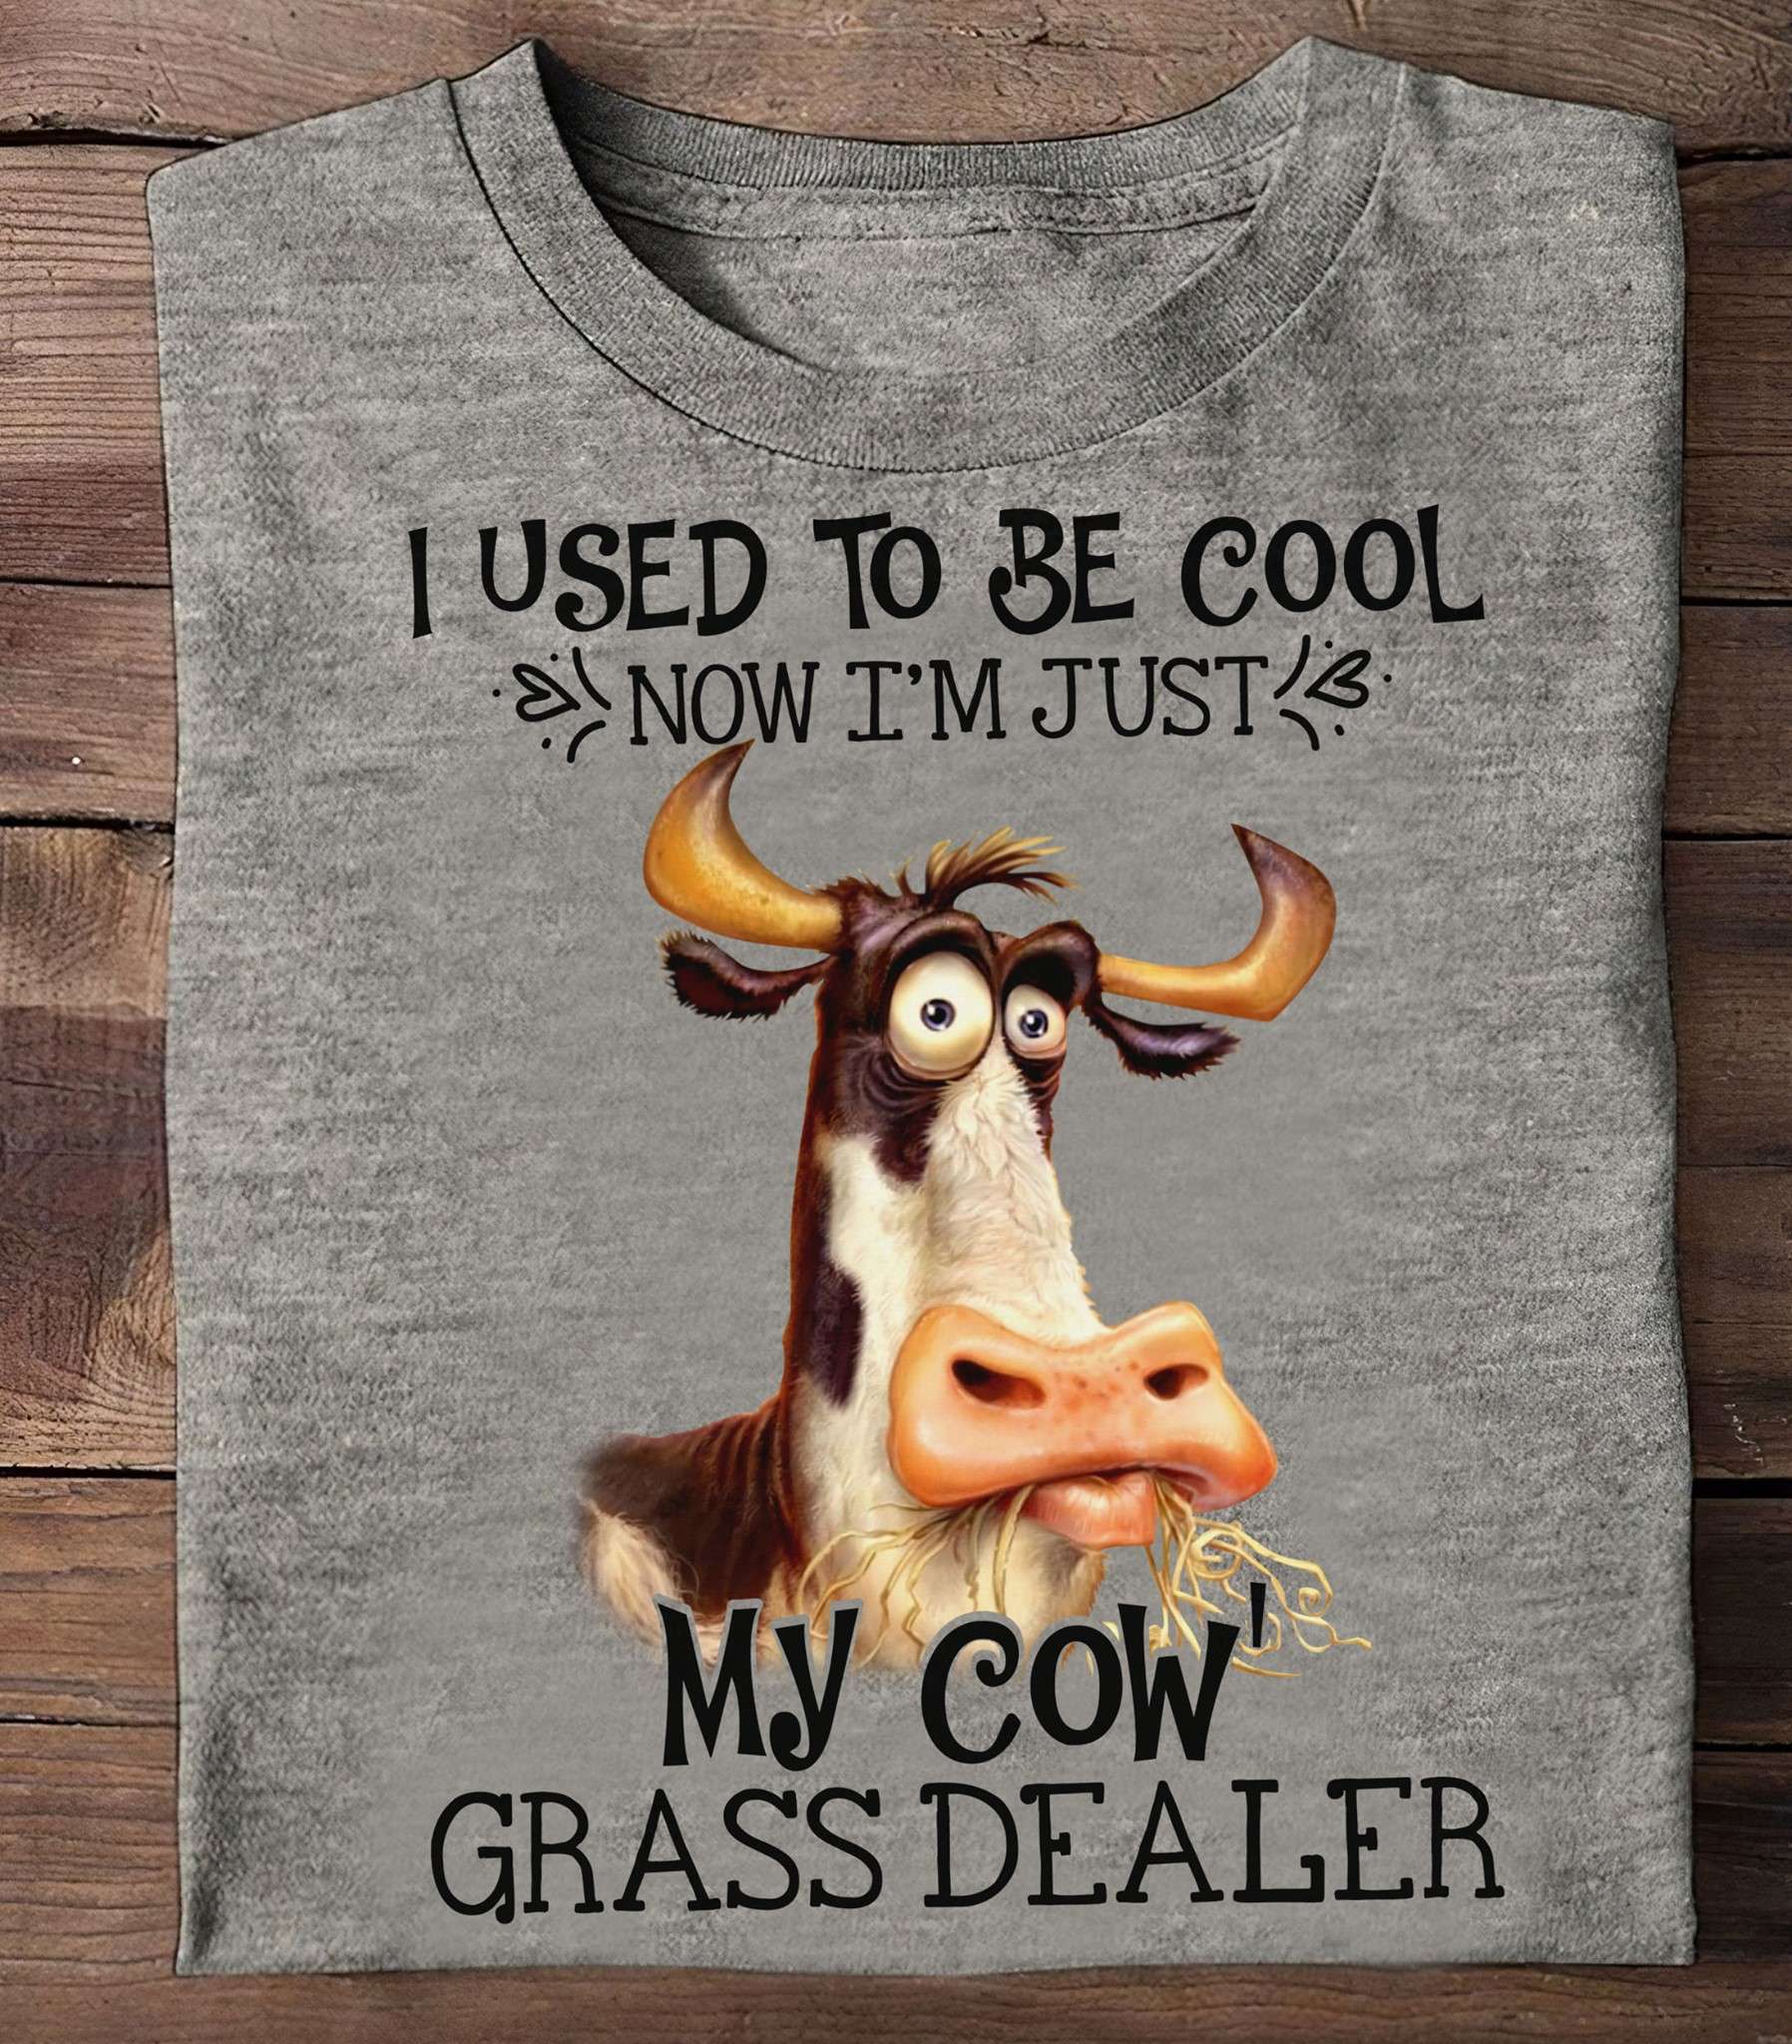 I used to be cool now I'm just my cow grass dealer - Funny cow graphic T-shirt, cow lover gift